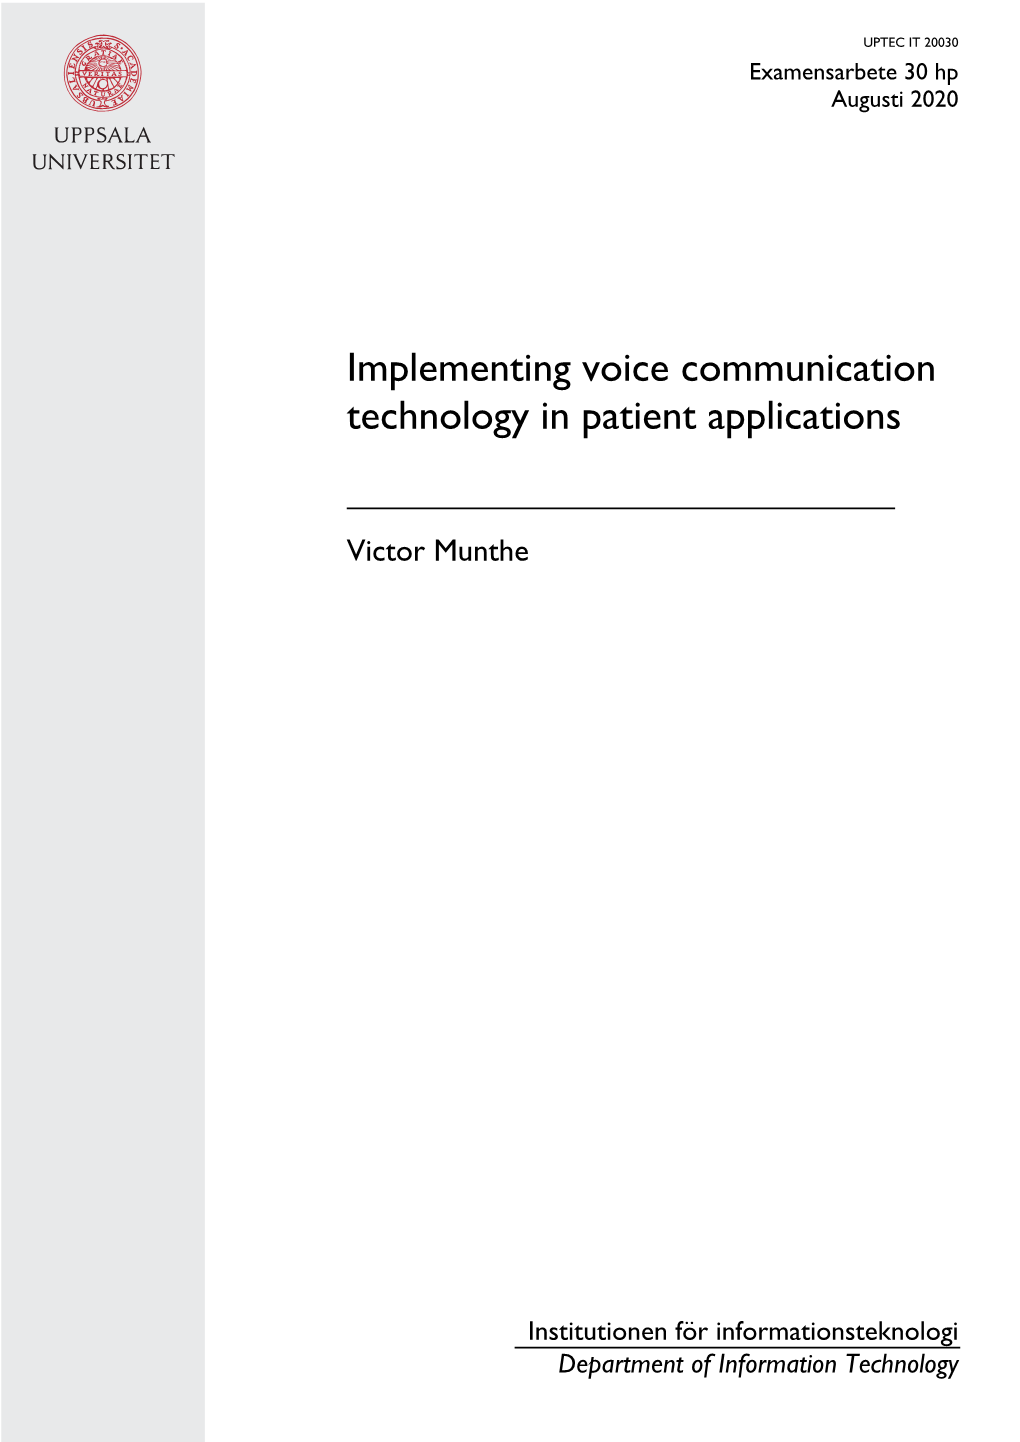 Implementing Voice Communication Technology in Patient Applications